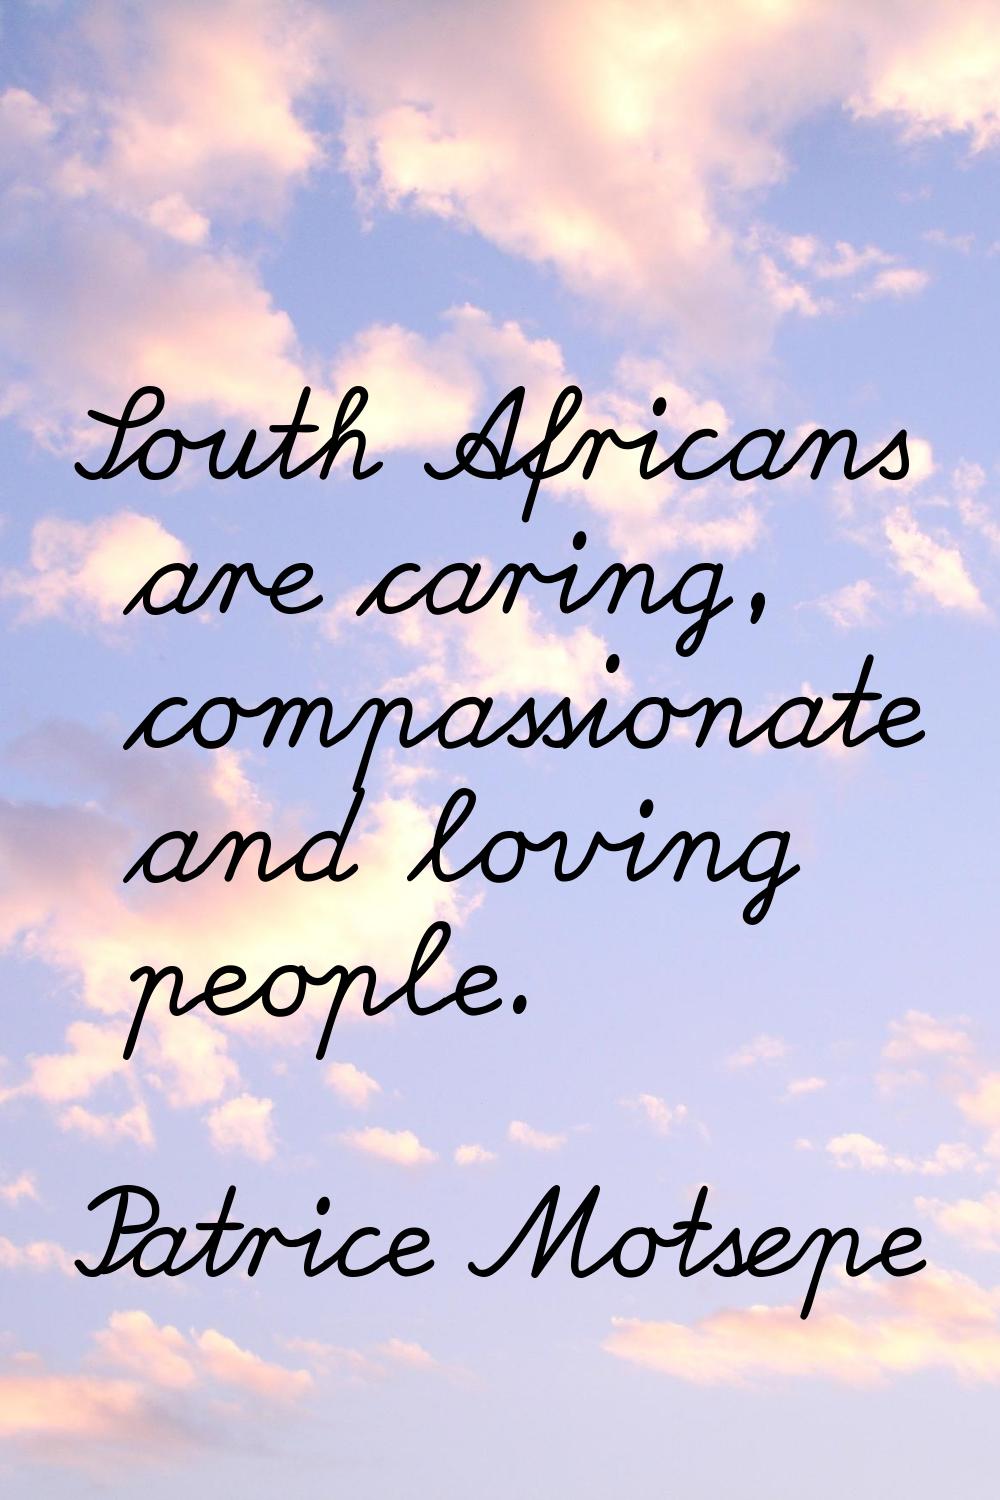 South Africans are caring, compassionate and loving people.